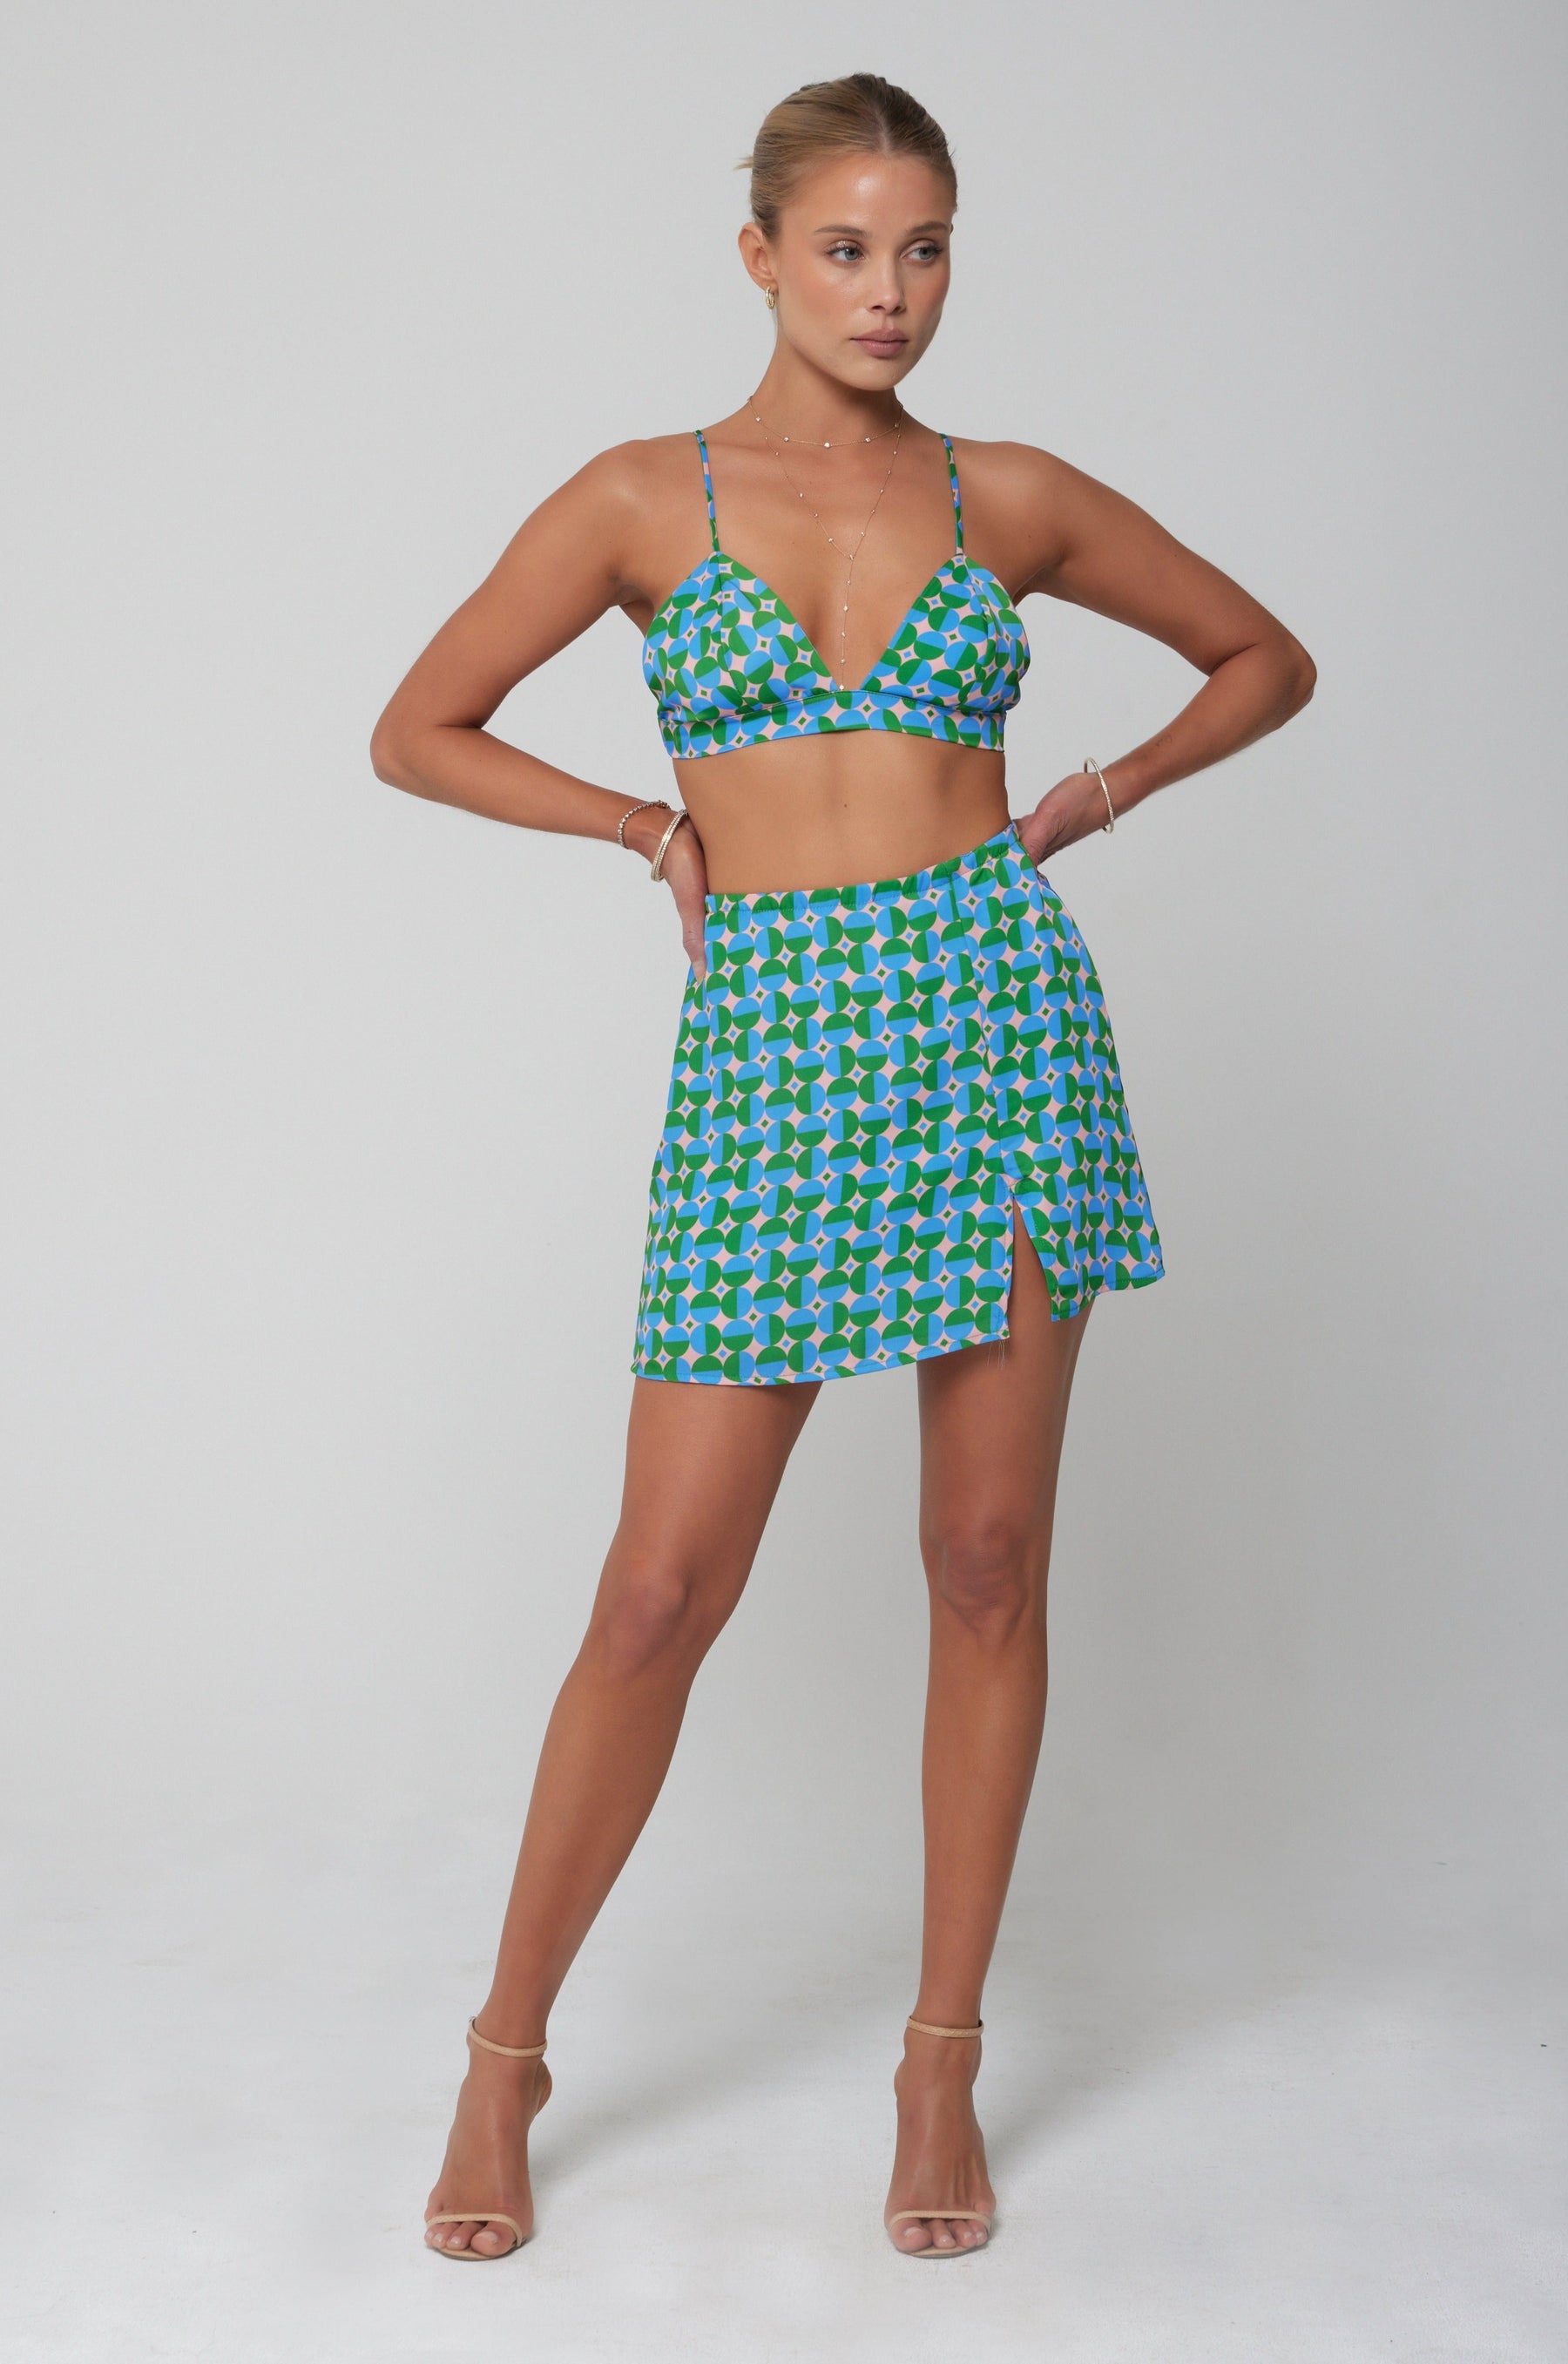 This is an image of Kenzie Skirt in Oasis - RESA featuring a model wearing the dress